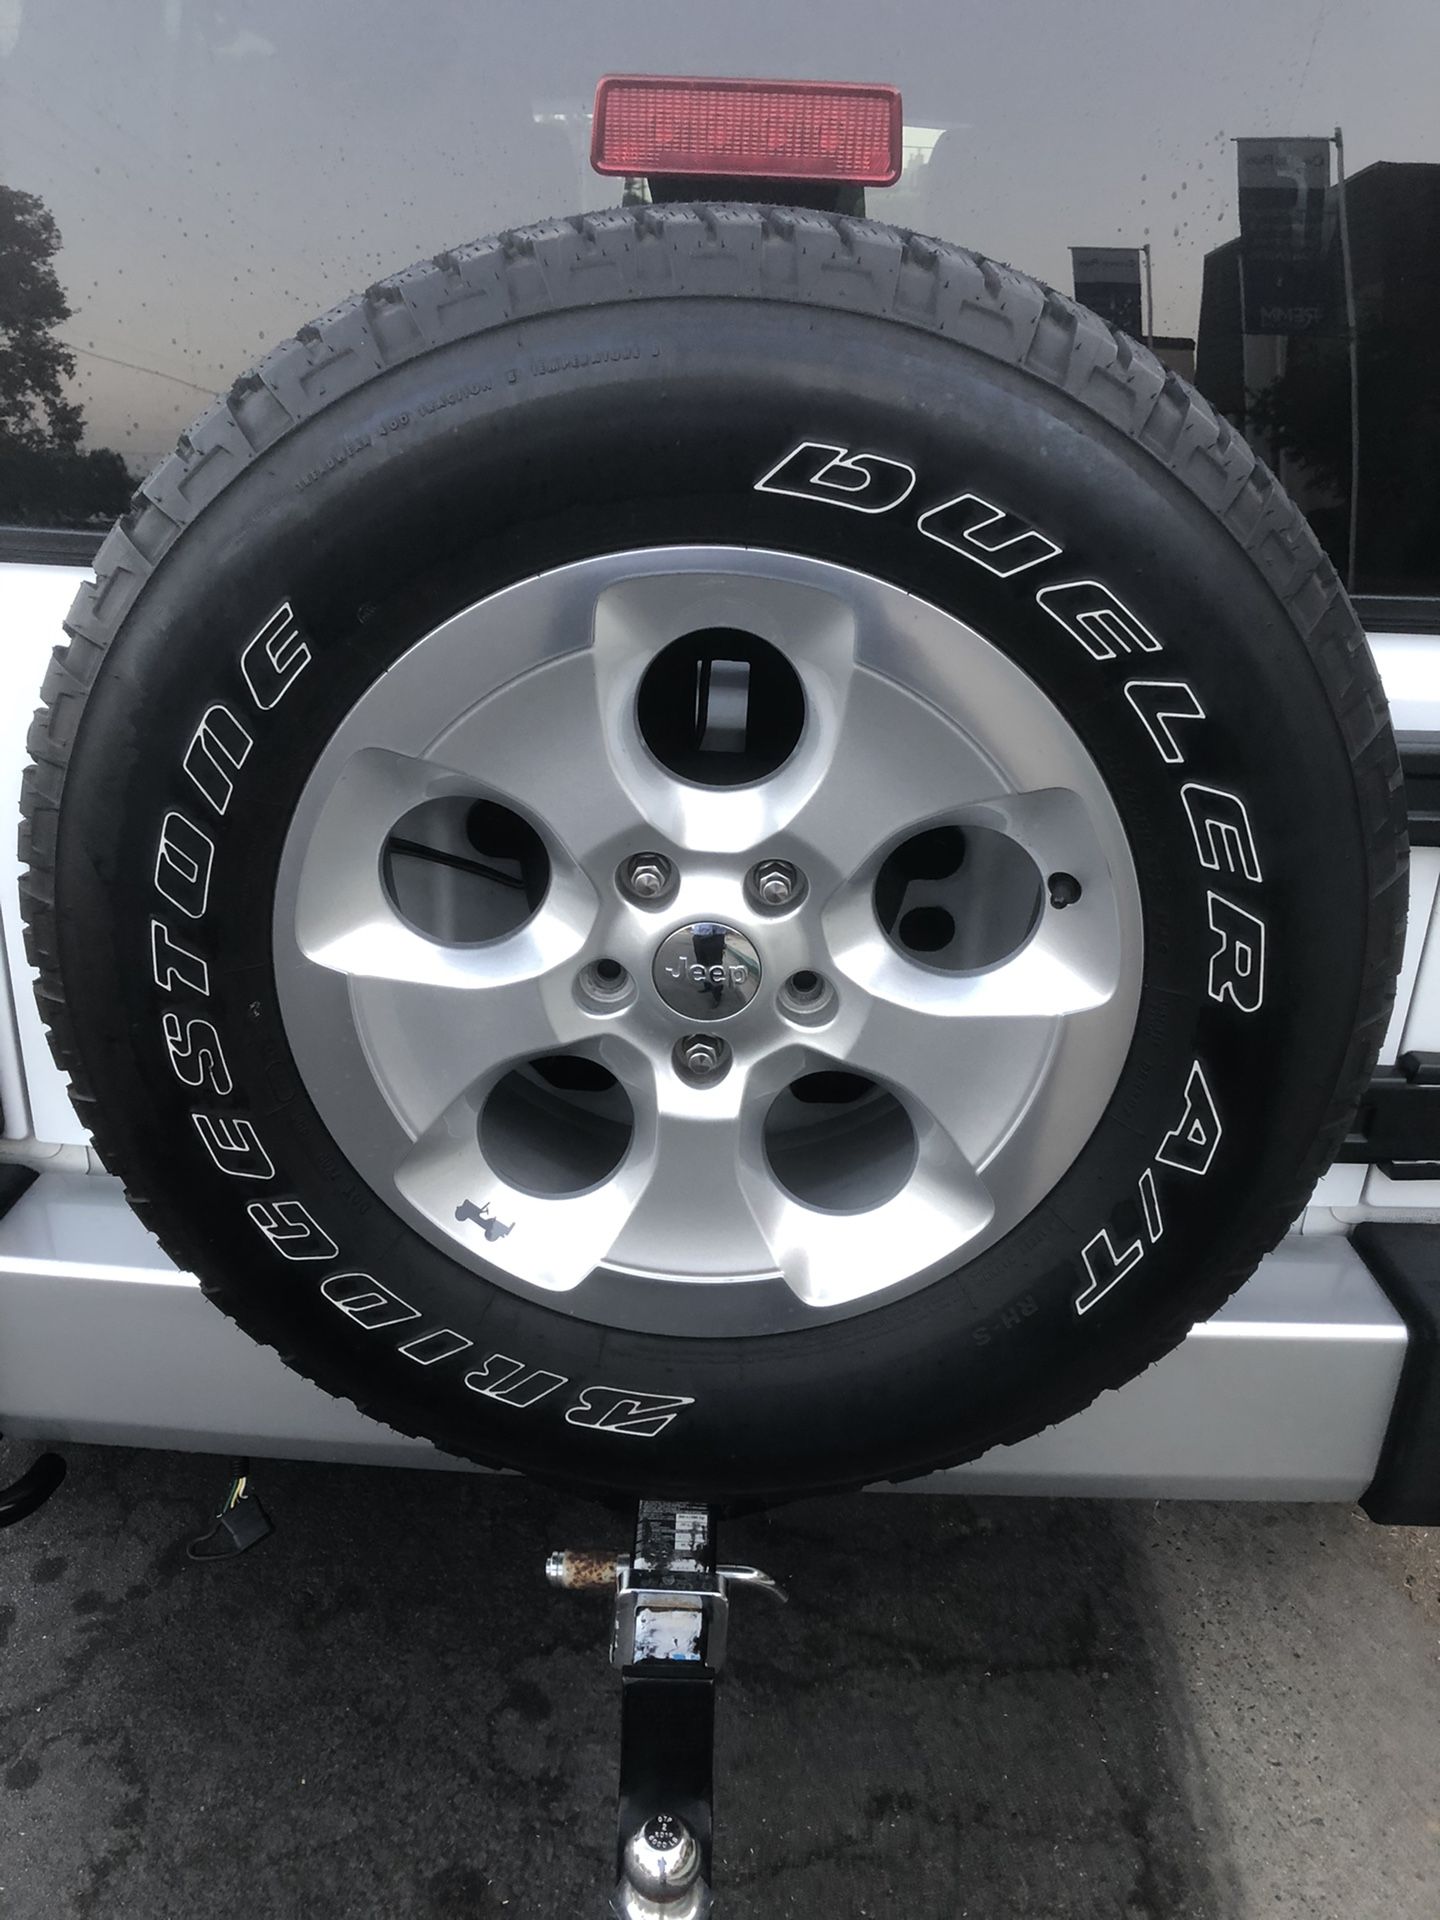 2016 Jeep Wrangler OEM Tires and Rims - Not the Jeep itself.